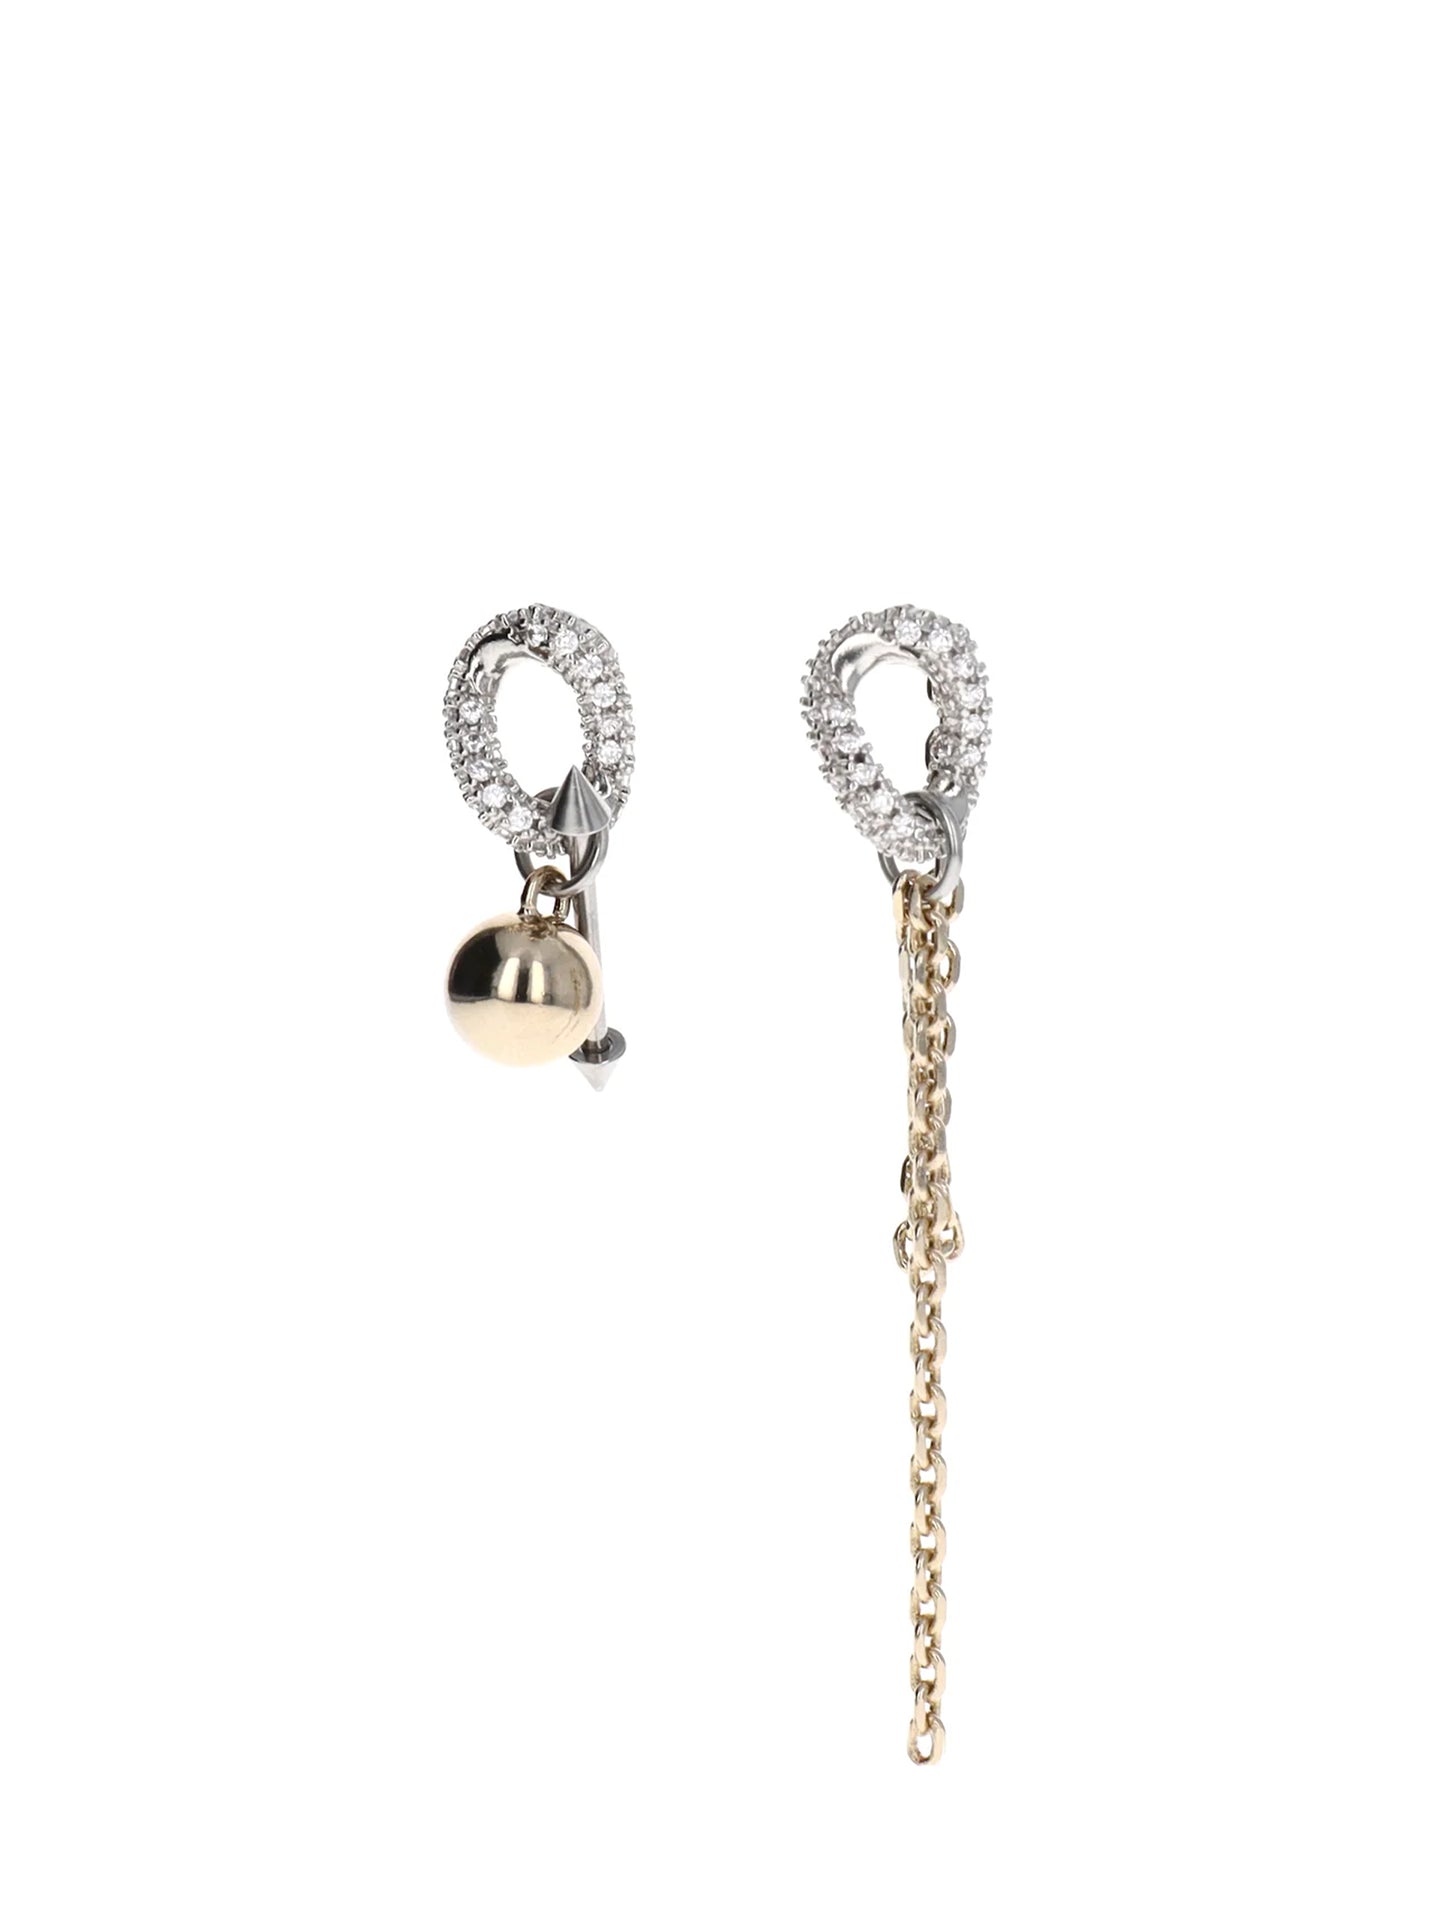 Justine Clenquet Darcy Earrings